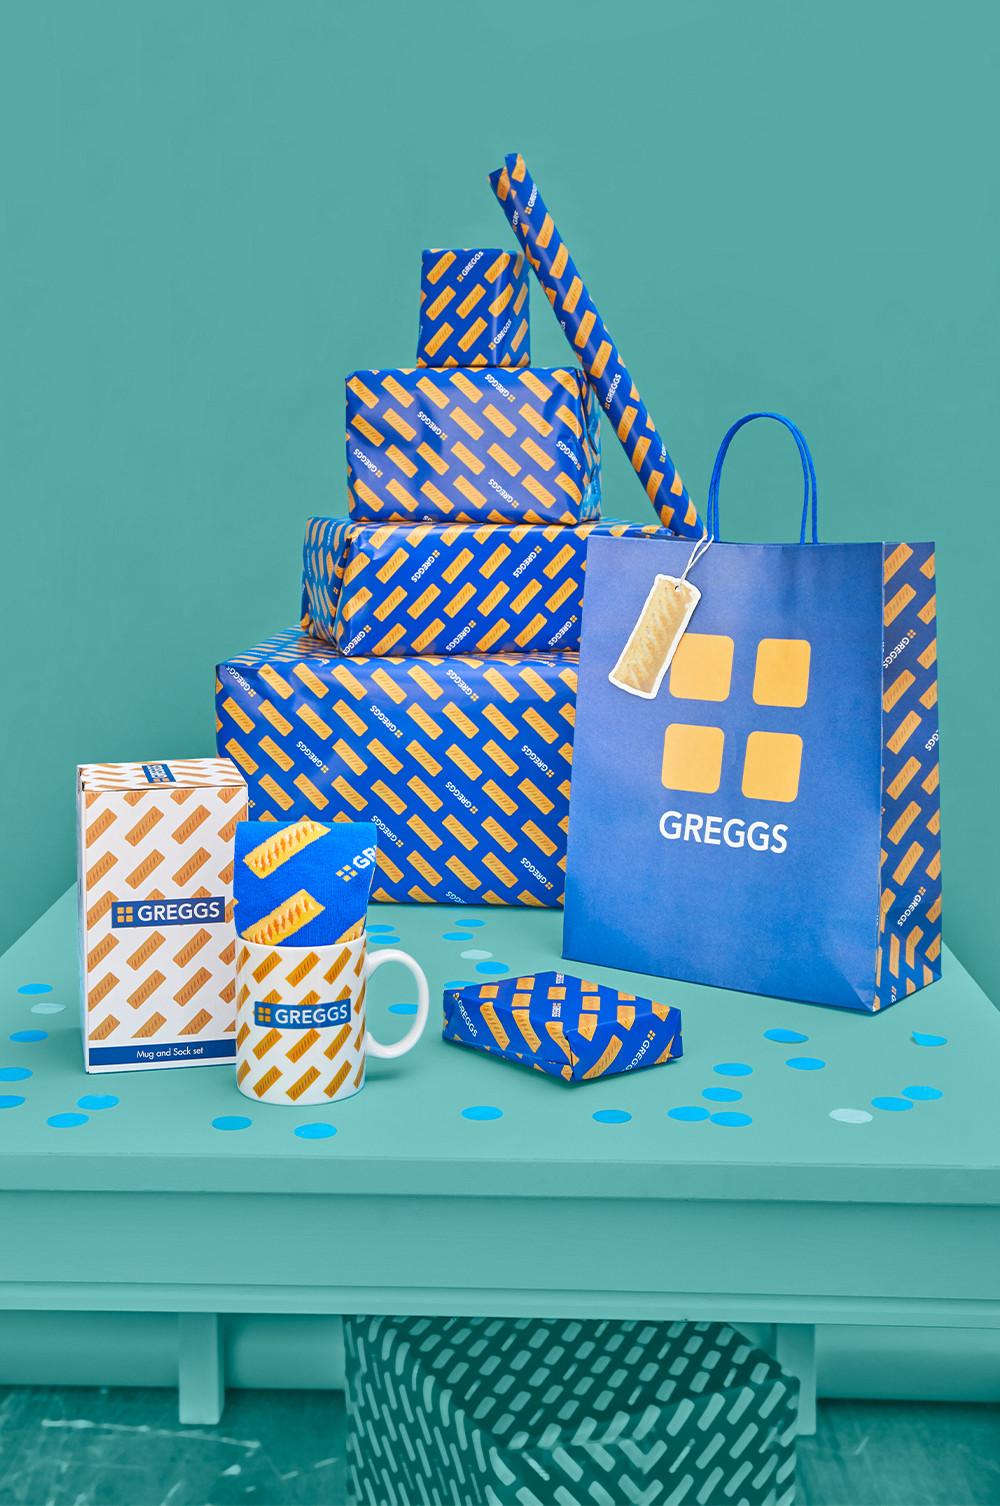 Primark X Greggs Christmas Clothing & Gifting Collection